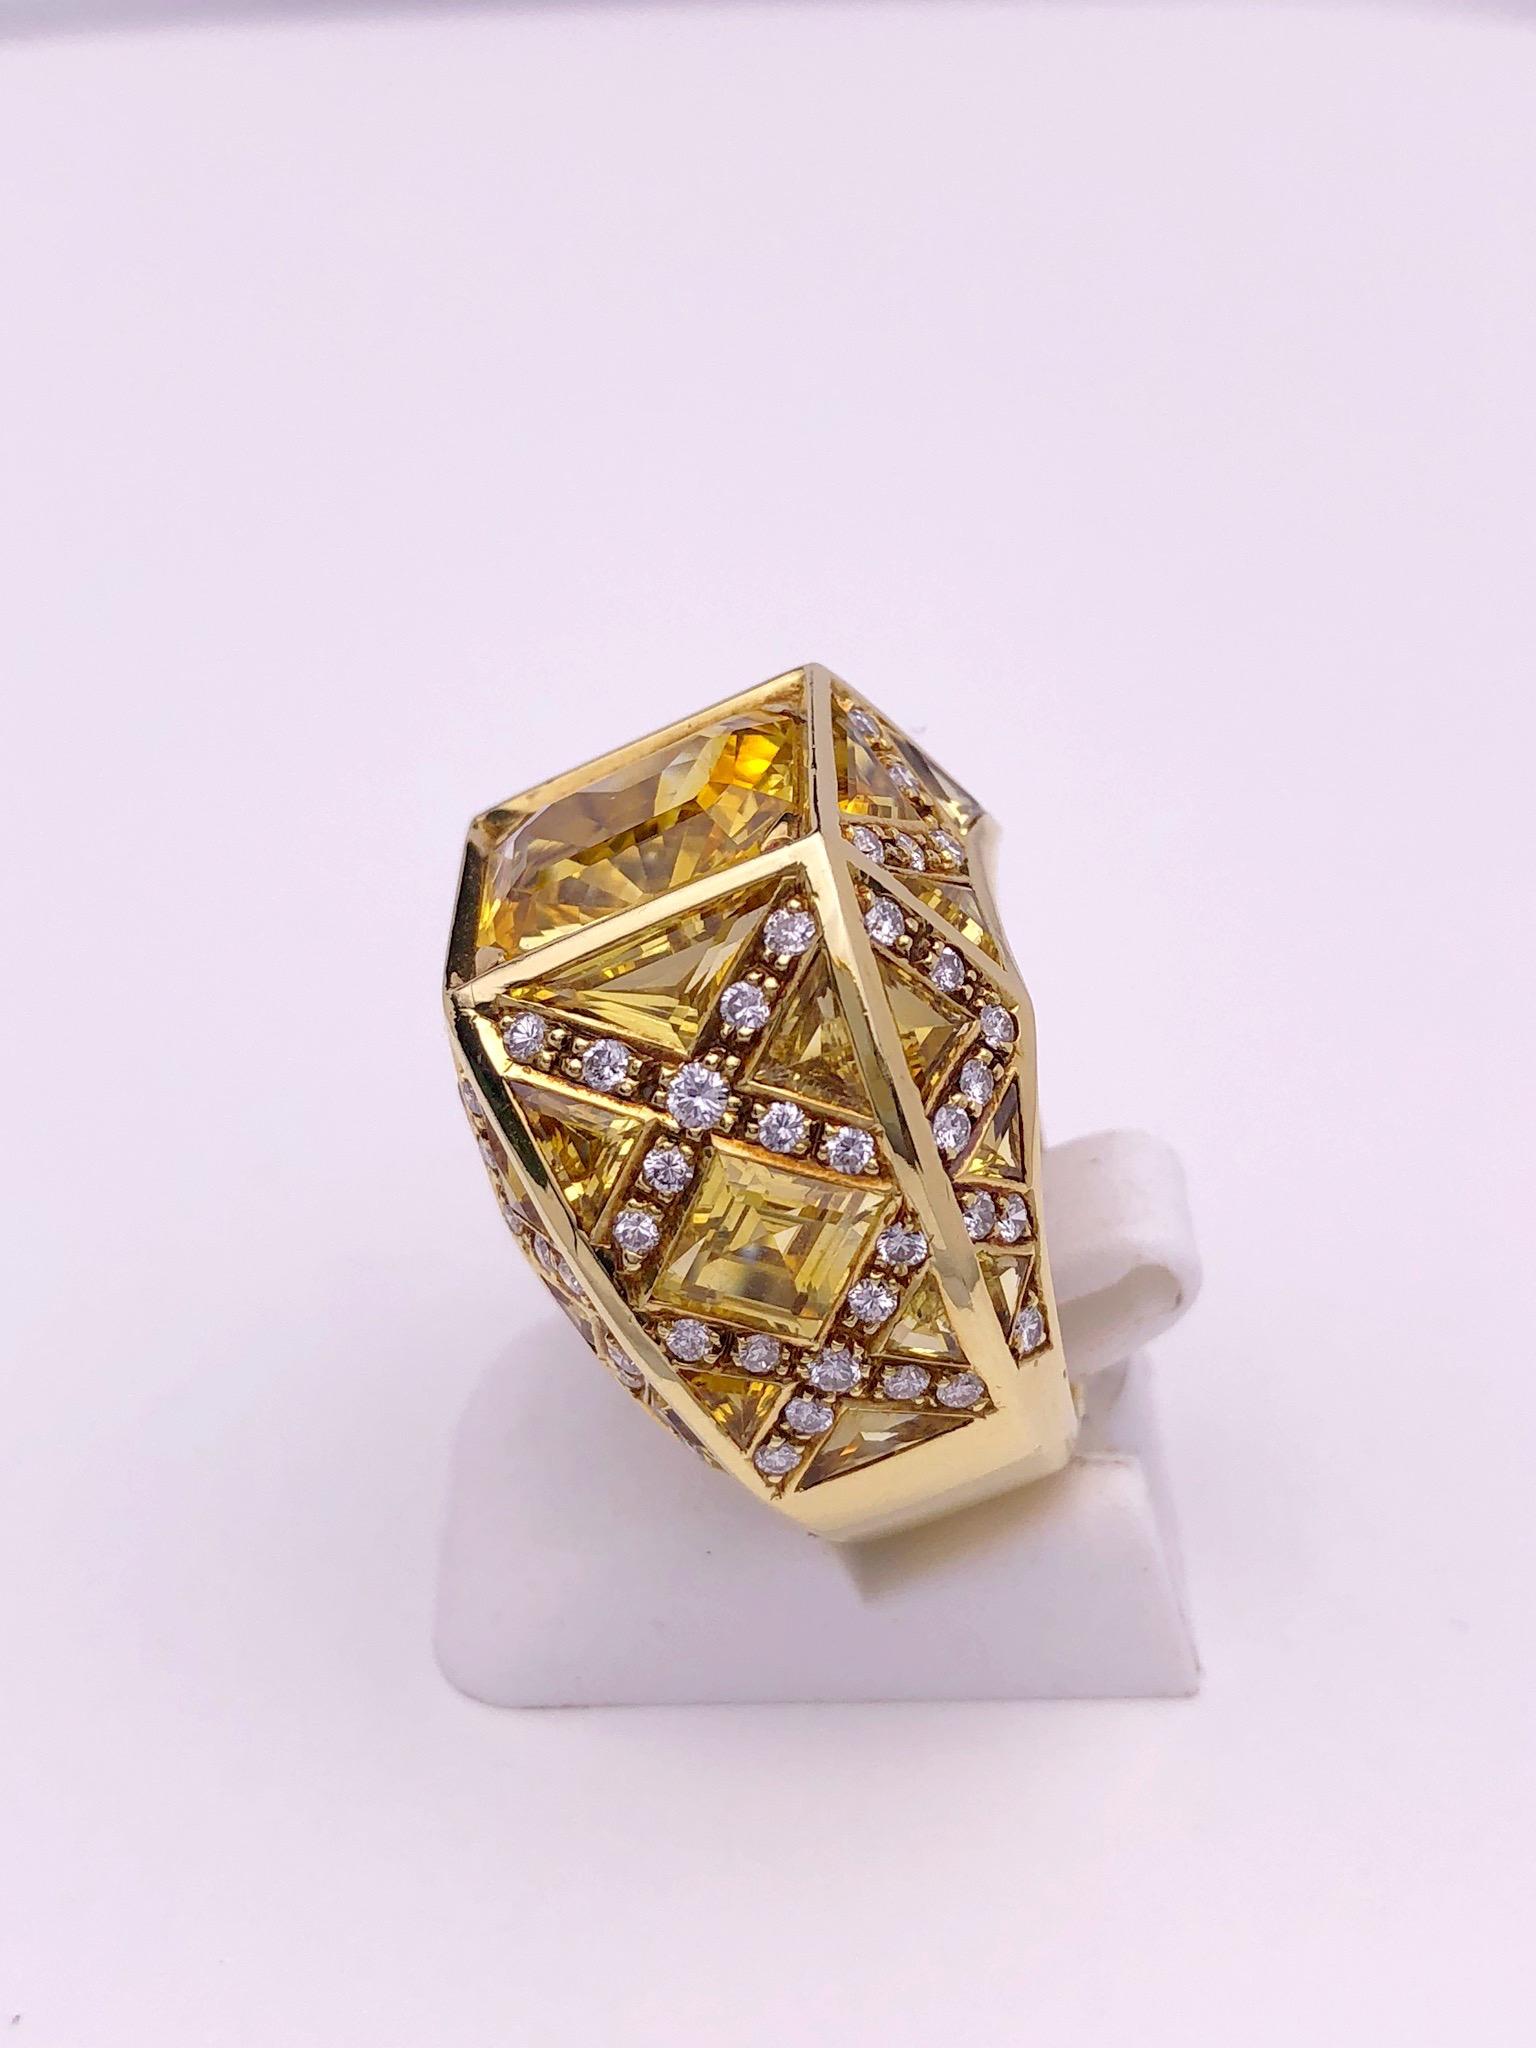 Rodney Rayner is well known for his unique style. This ring is the perfect example. Crafted entirely in 18KT yellow gold the highlight of this ring is the magnificent 5.23 carat Emerald cut Yellow Sapphire. Triangle and Lozenge cut Yellow Sapphires